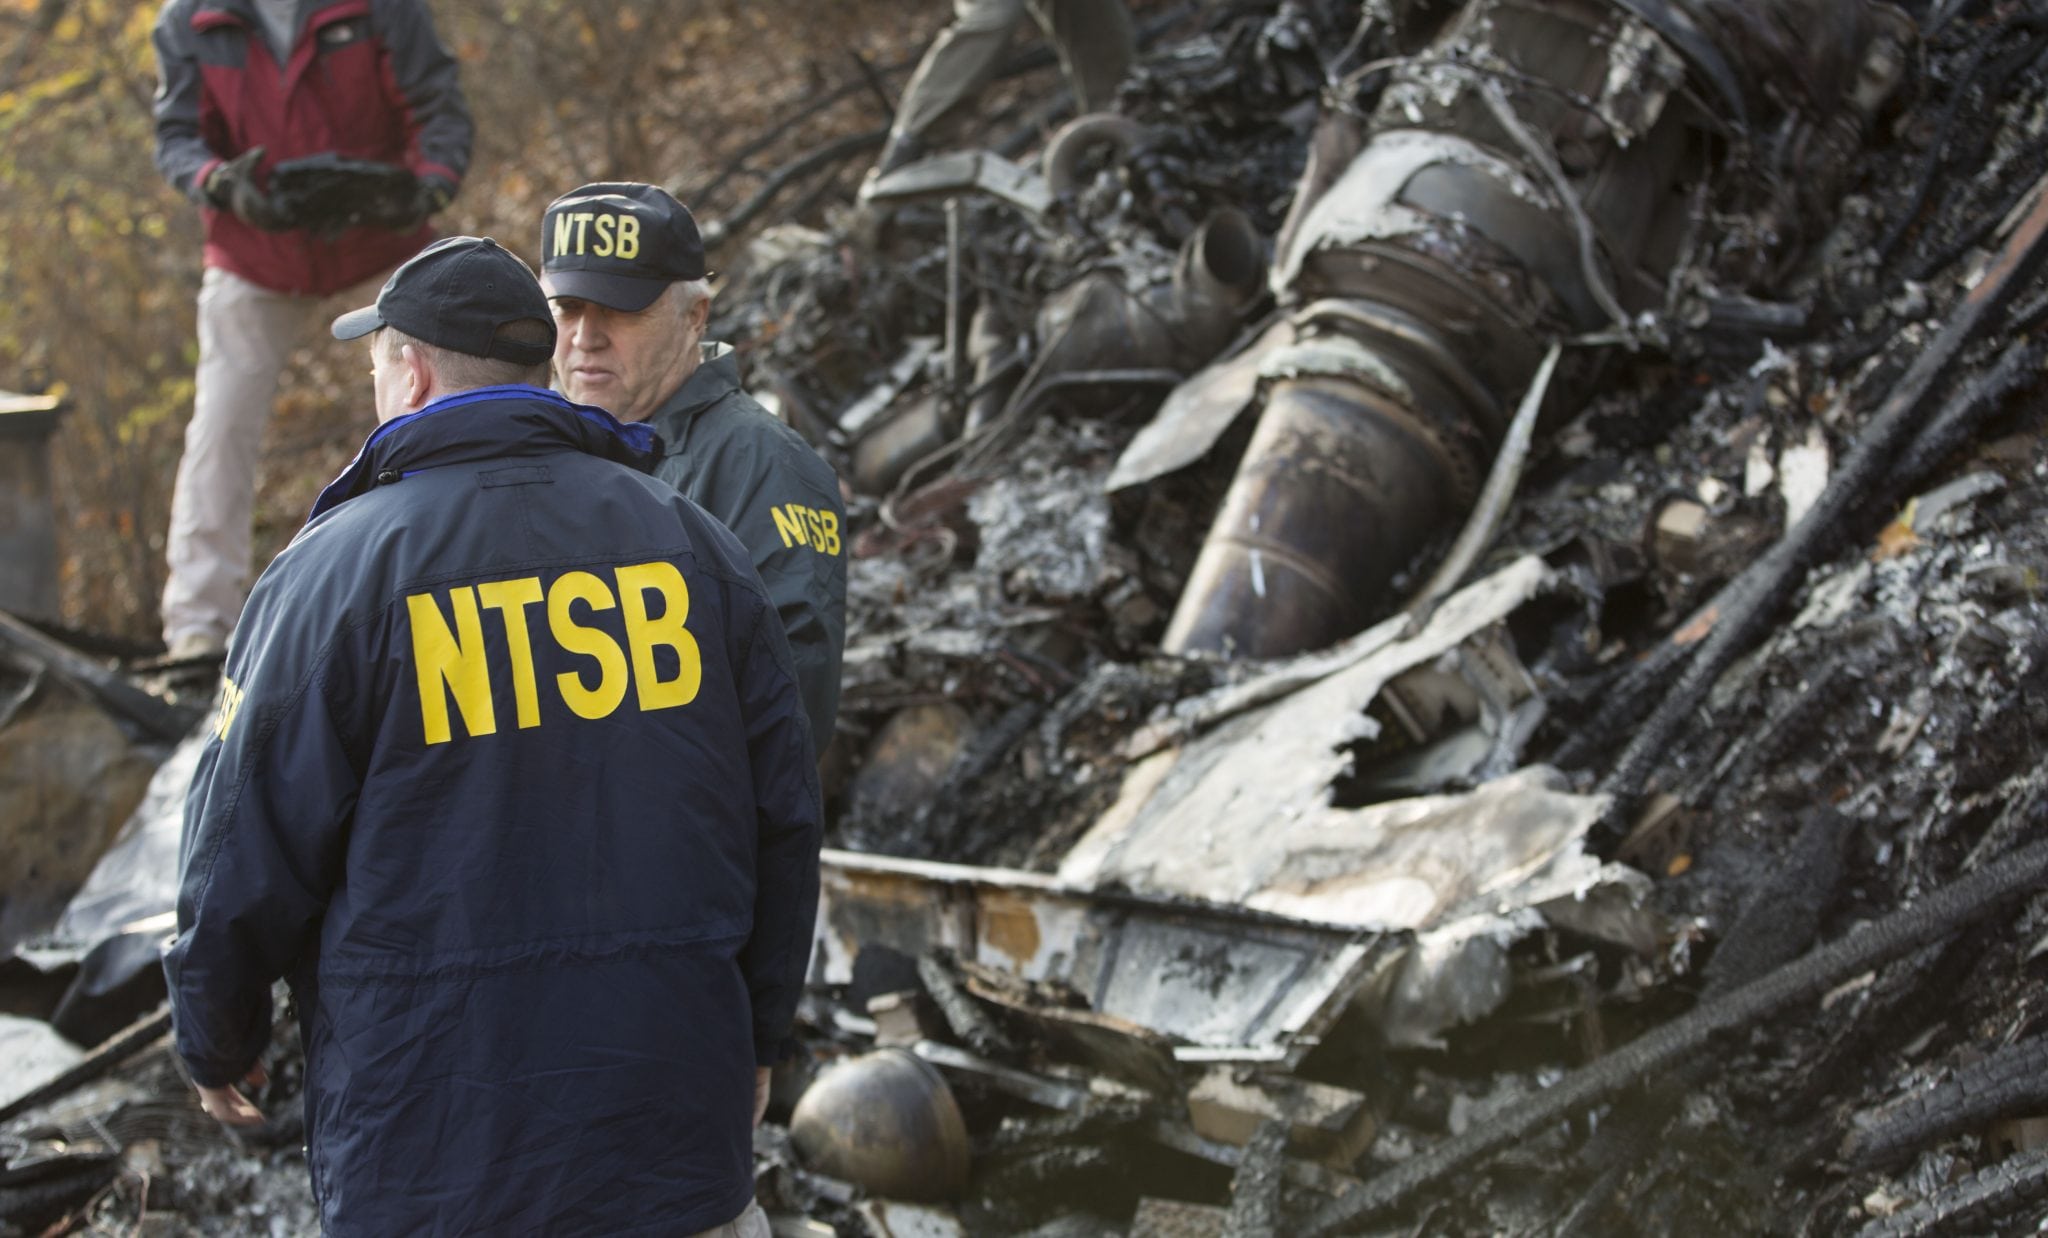 20-facts-about-national-transportation-safety-board-ntsb